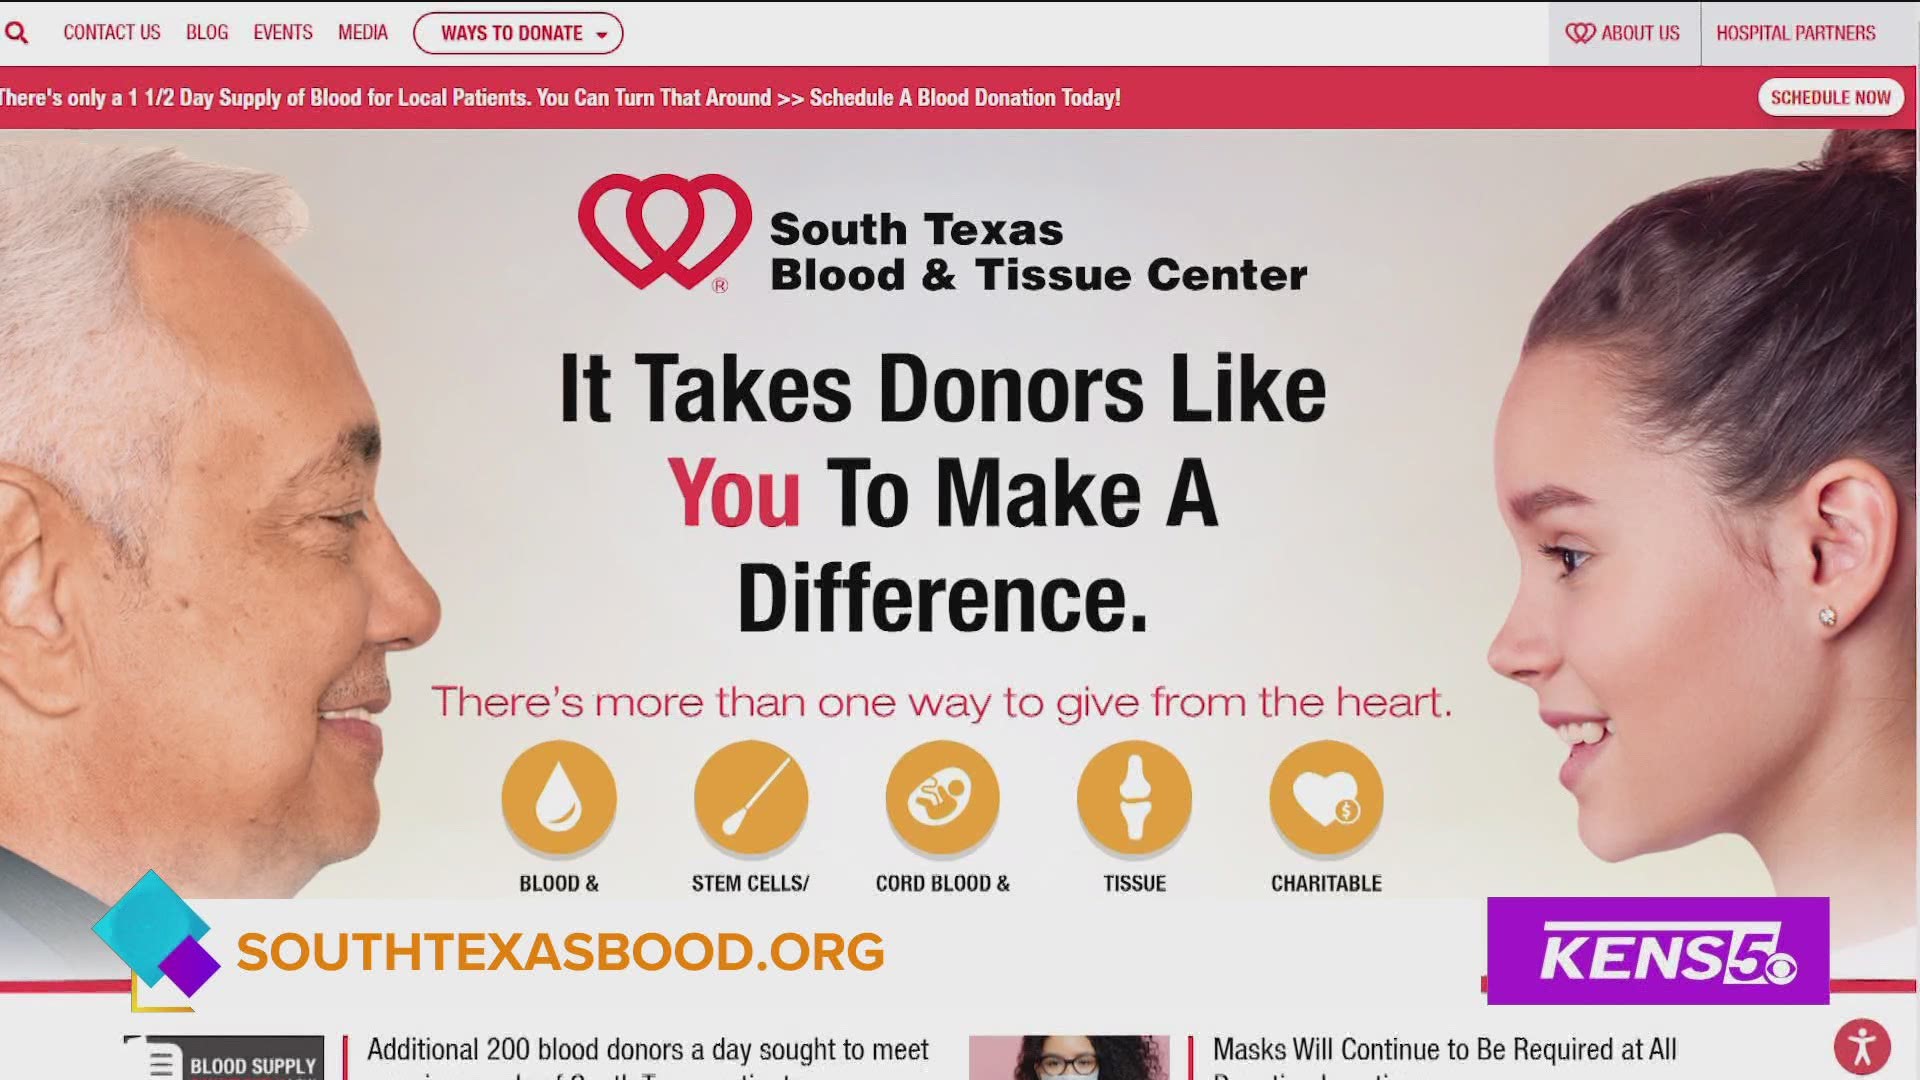 South Texas Blood & Tissue needs your support more than ever before.